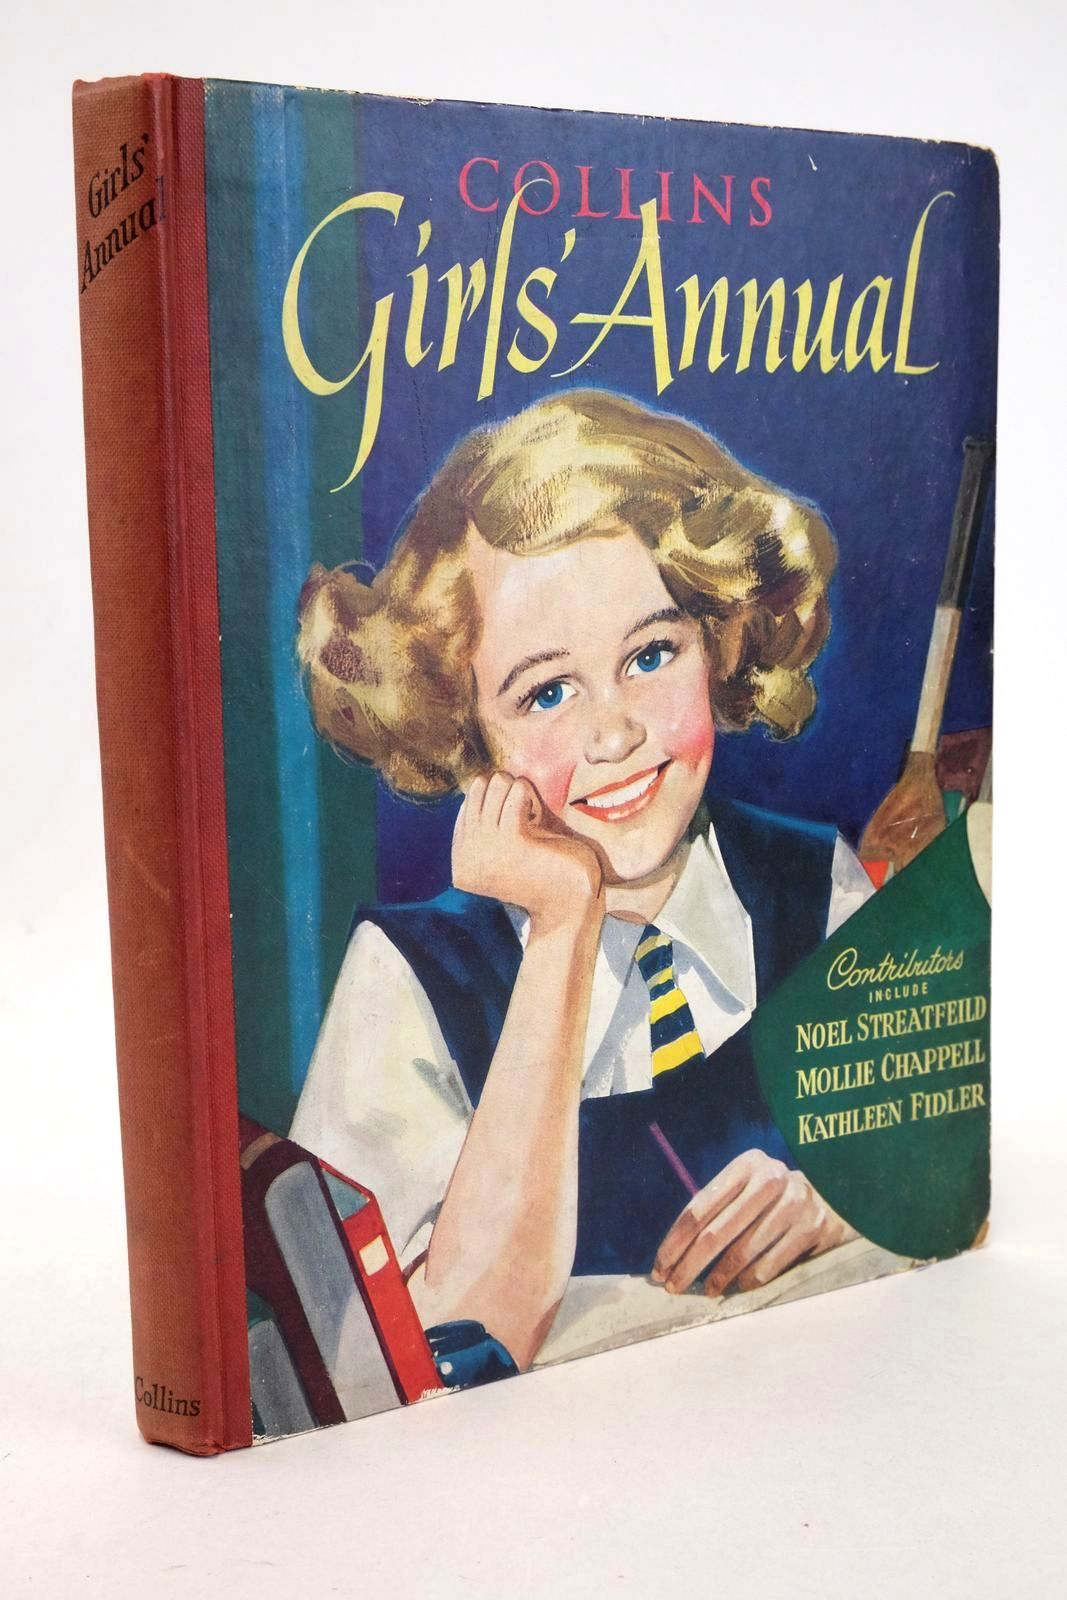 Photo of COLLINS GIRLS' ANNUAL written by Bayley, Viola Streatfeild, Noel Chappell, Mollie Fidler, Kathleen et al, illustrated by Wynne, D.L. Varty, Frank Stobbs, William et al., published by Collins (STOCK CODE: 1327265)  for sale by Stella & Rose's Books